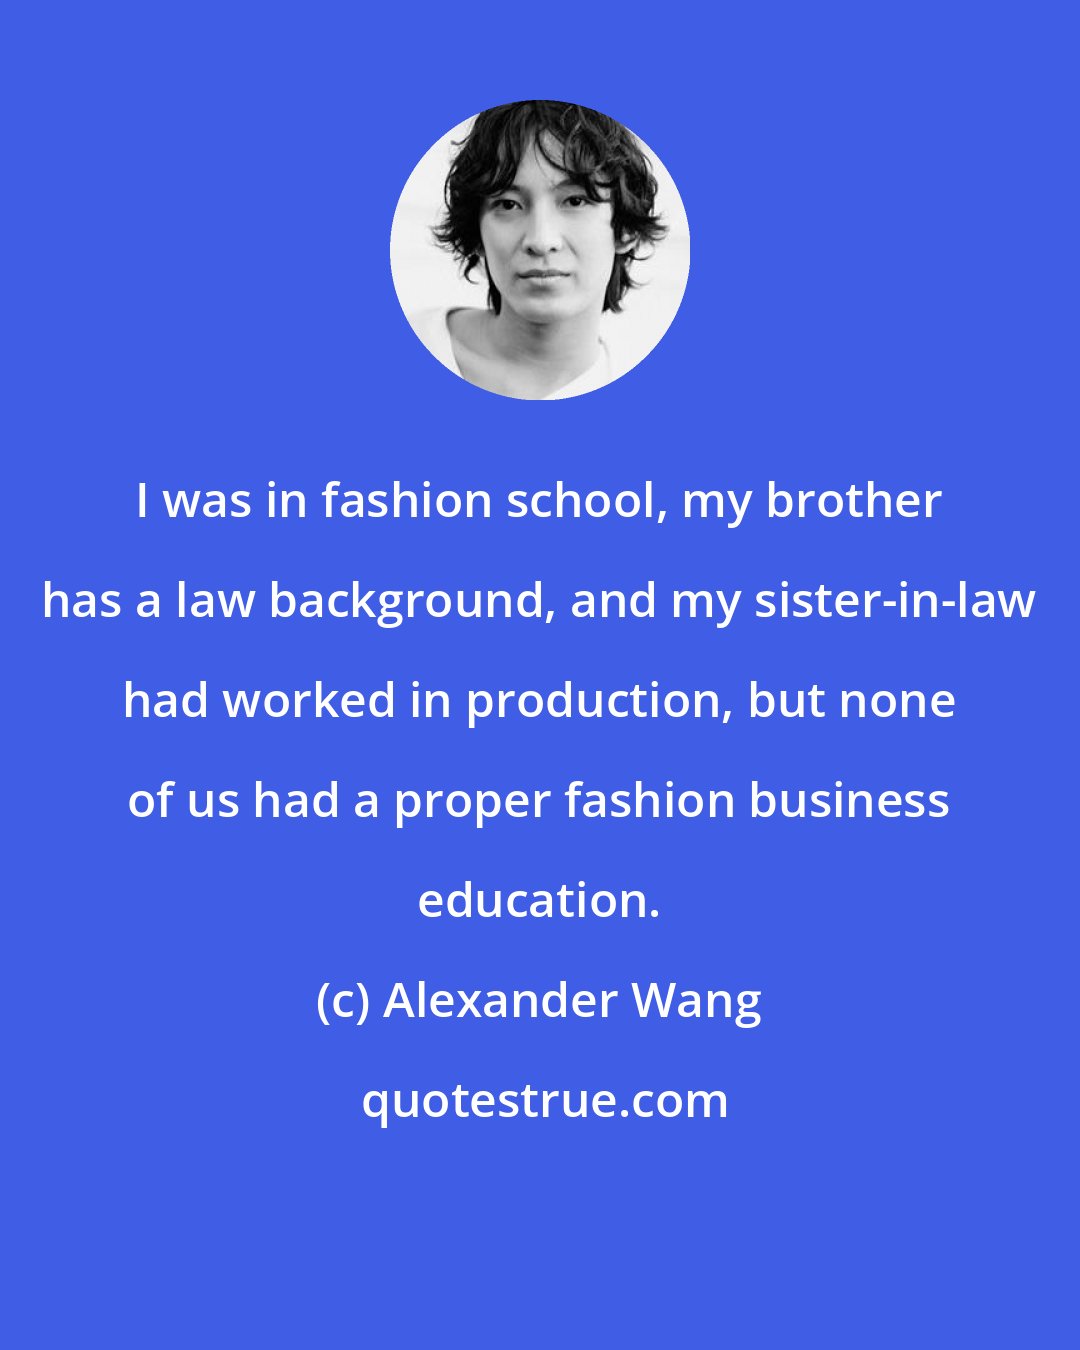 Alexander Wang: I was in fashion school, my brother has a law background, and my sister-in-law had worked in production, but none of us had a proper fashion business education.